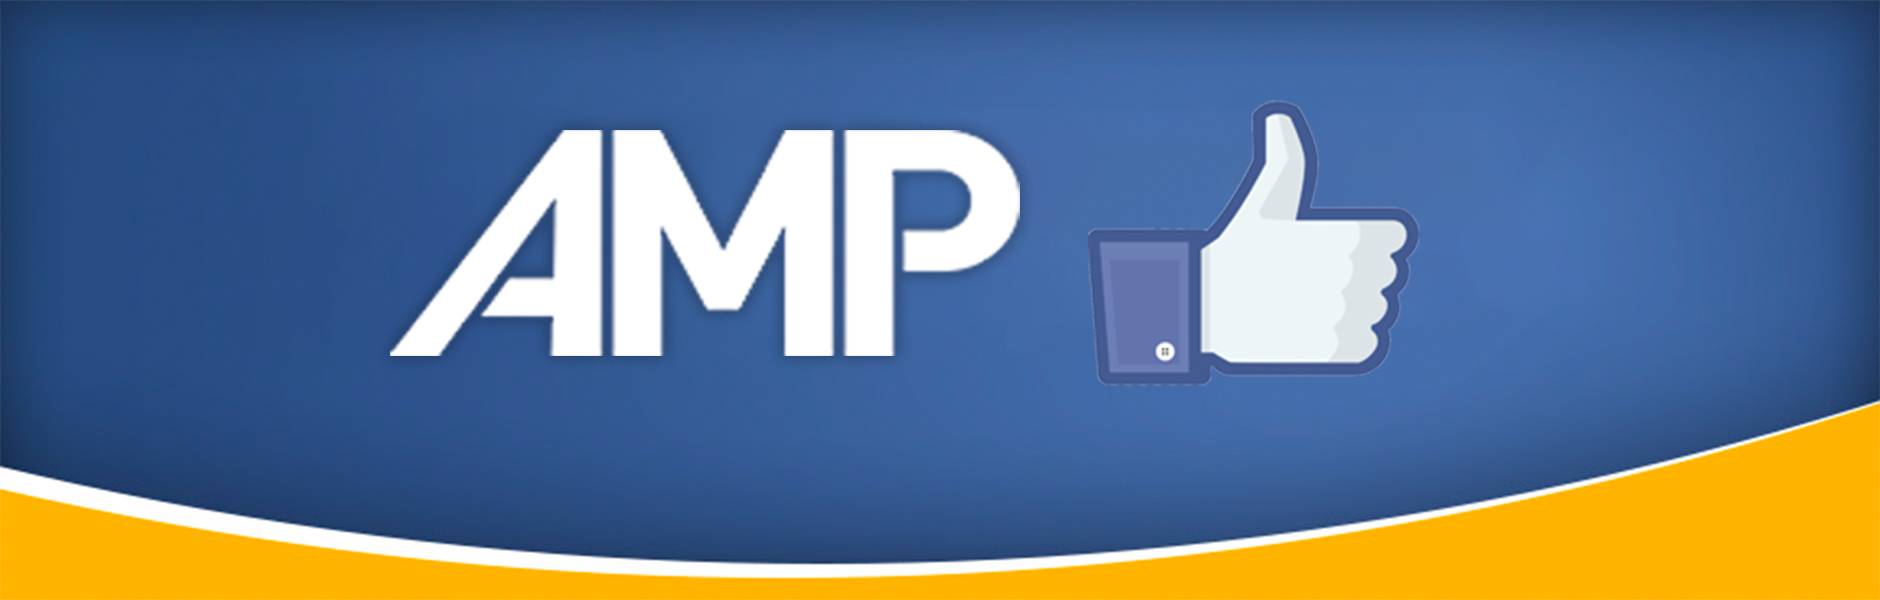 image of amp logo and facebook like button